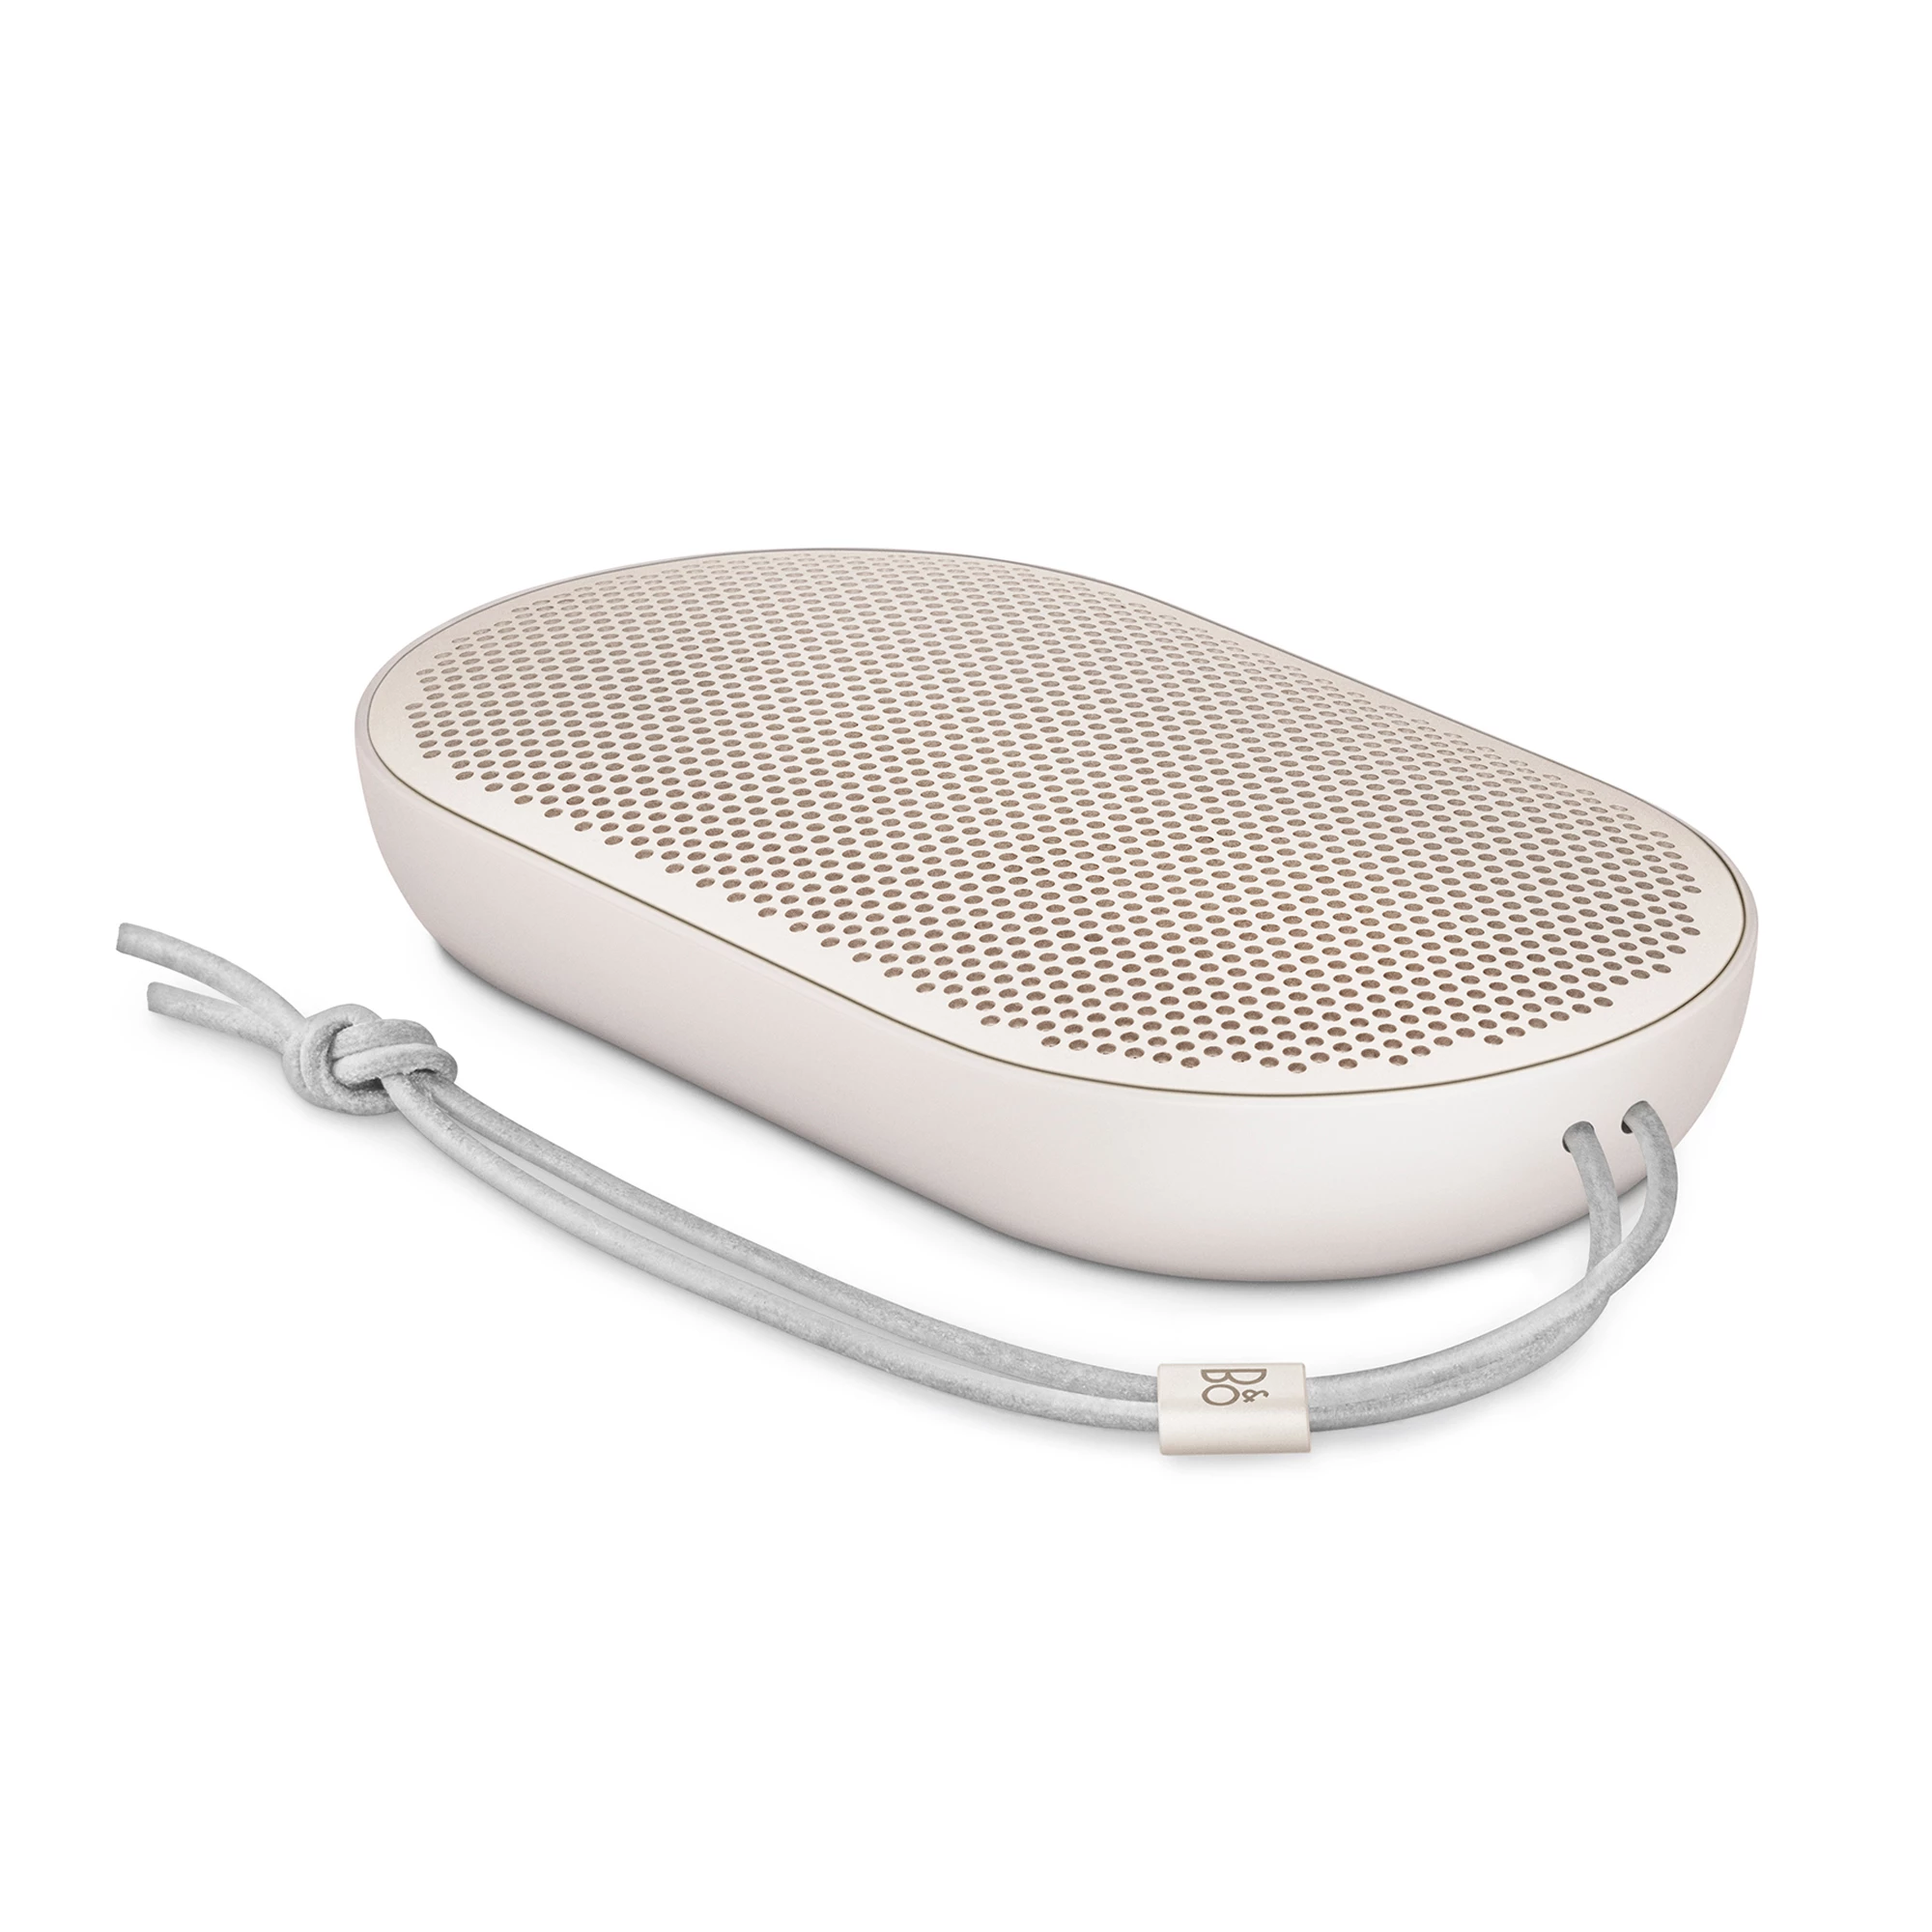 Bang & Olufsen BeoPlay P2 Sand Stone